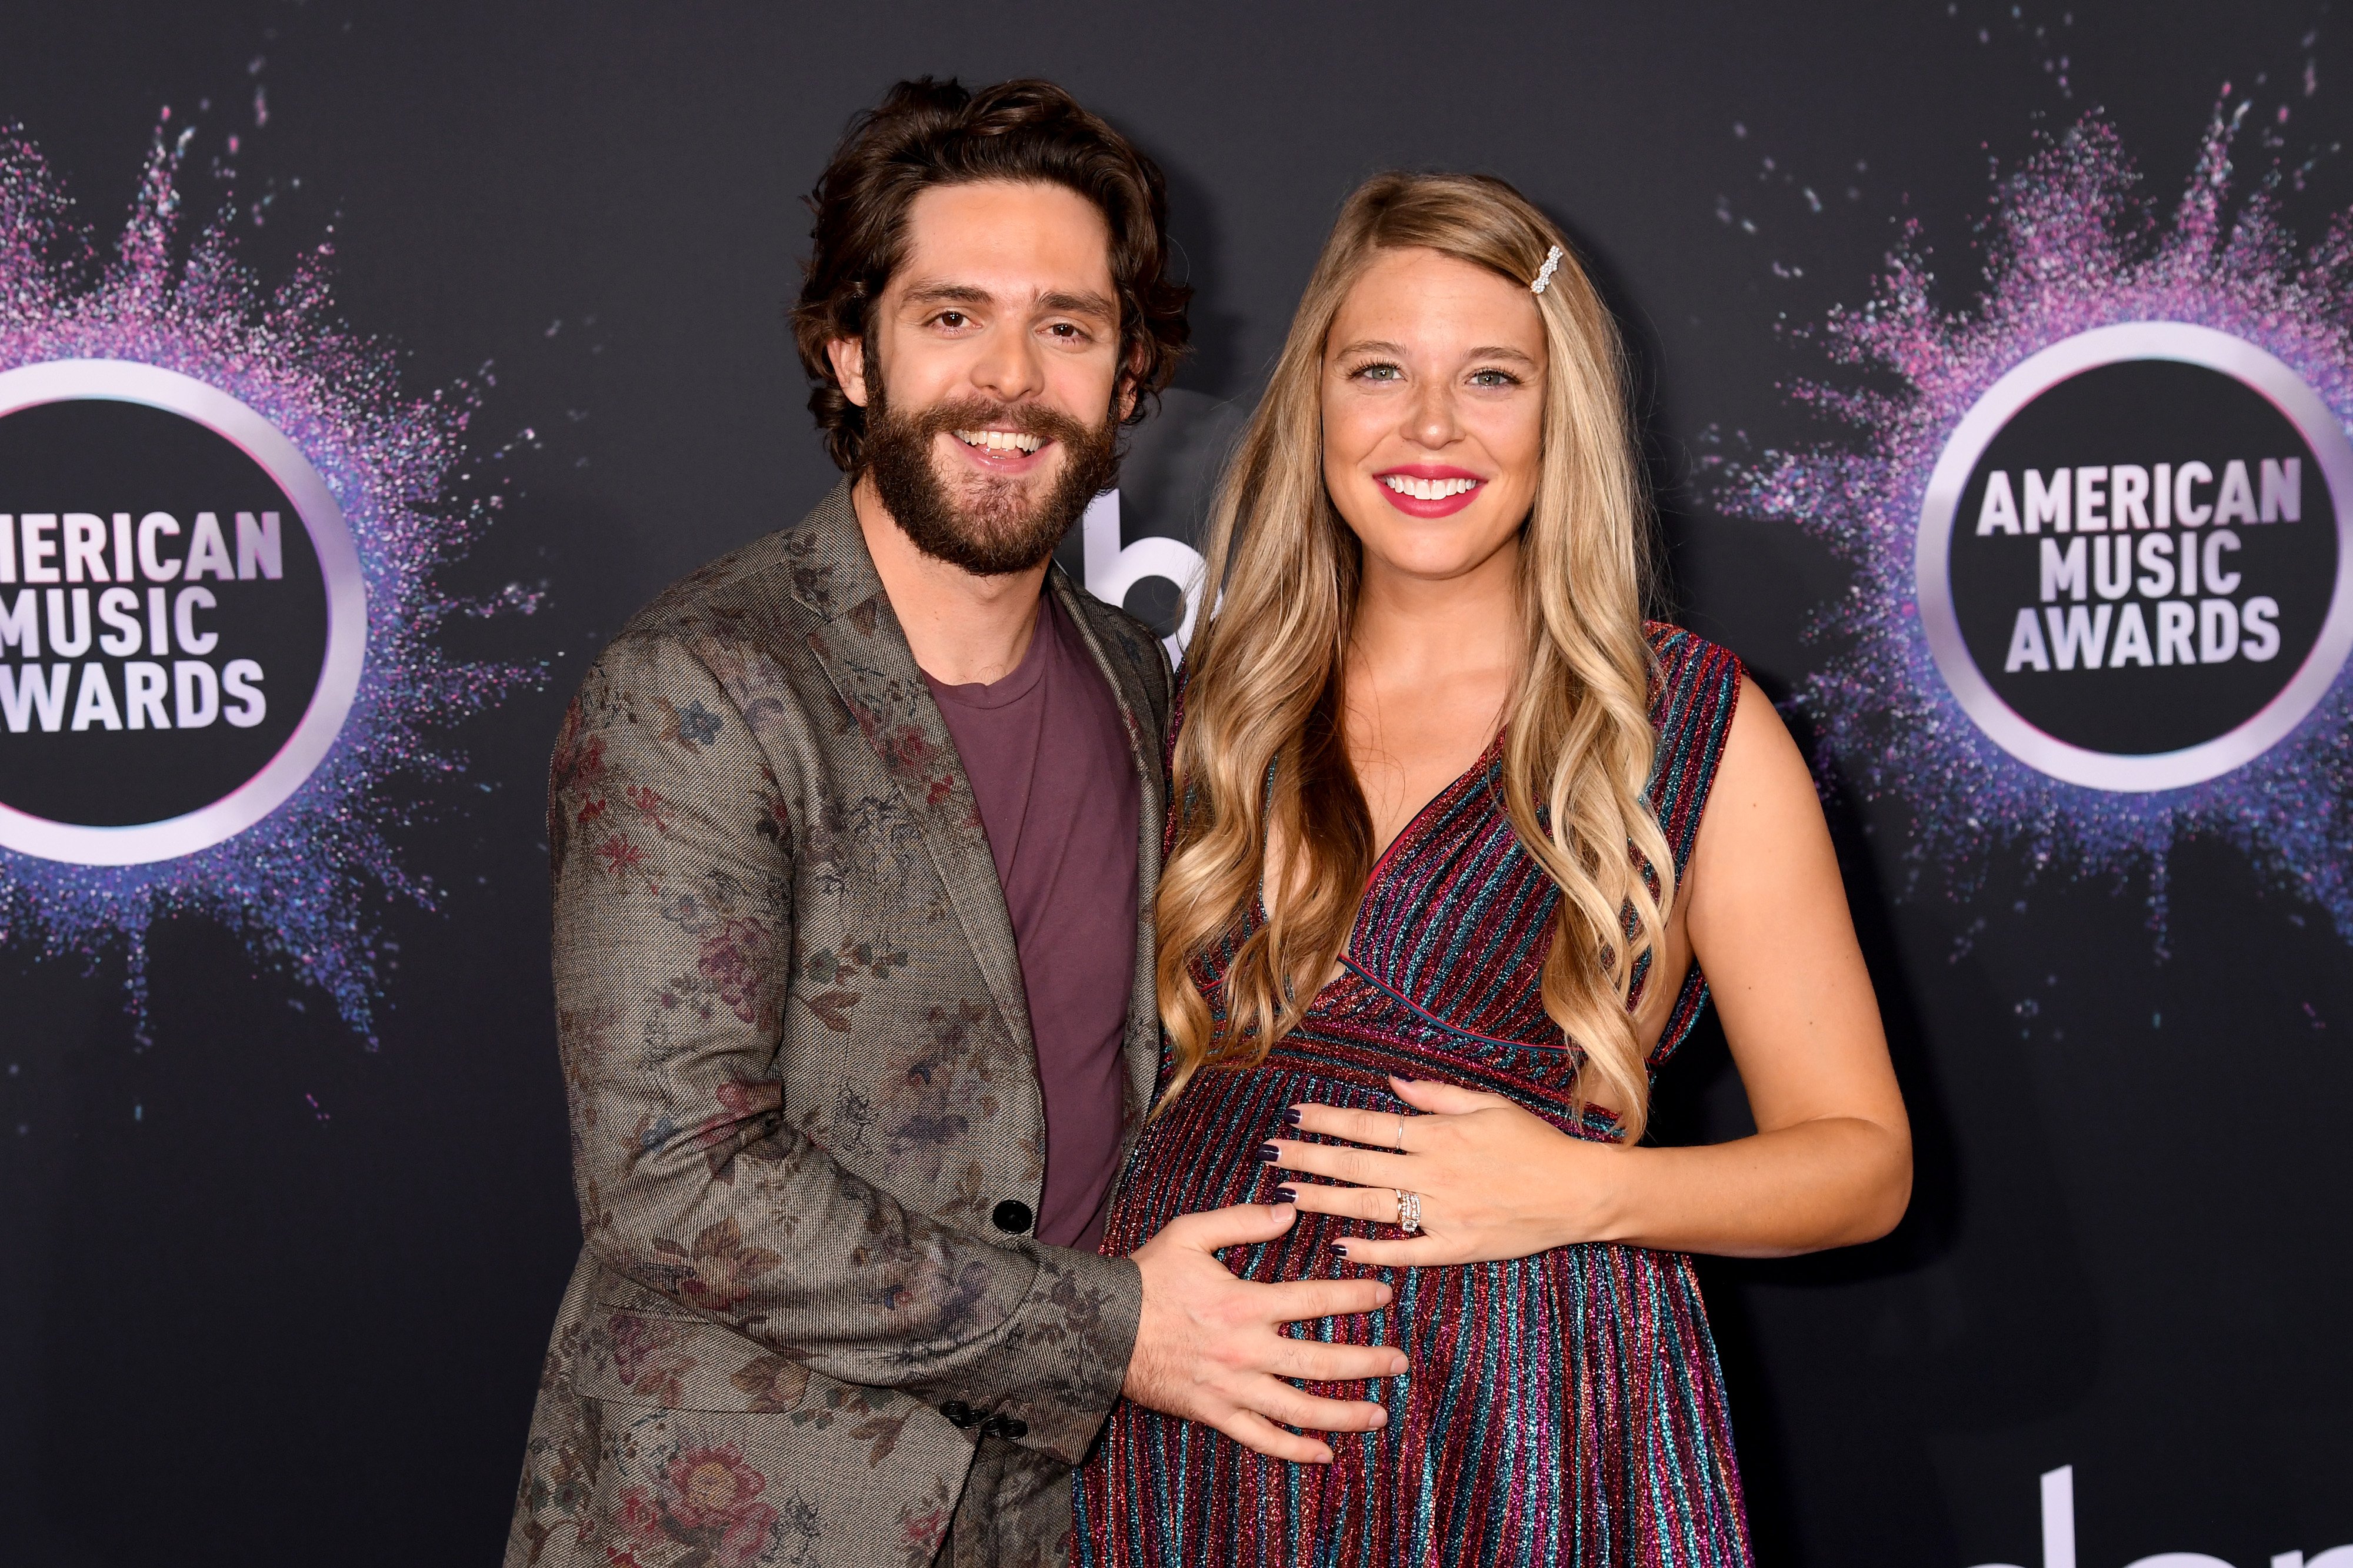 Thomas Rhett and Lauren Akins attend the 2019 American Music Awards at Microsoft Theater on November 24, 2019, in Los Angeles, California. | Source: FilmMagic for dcp